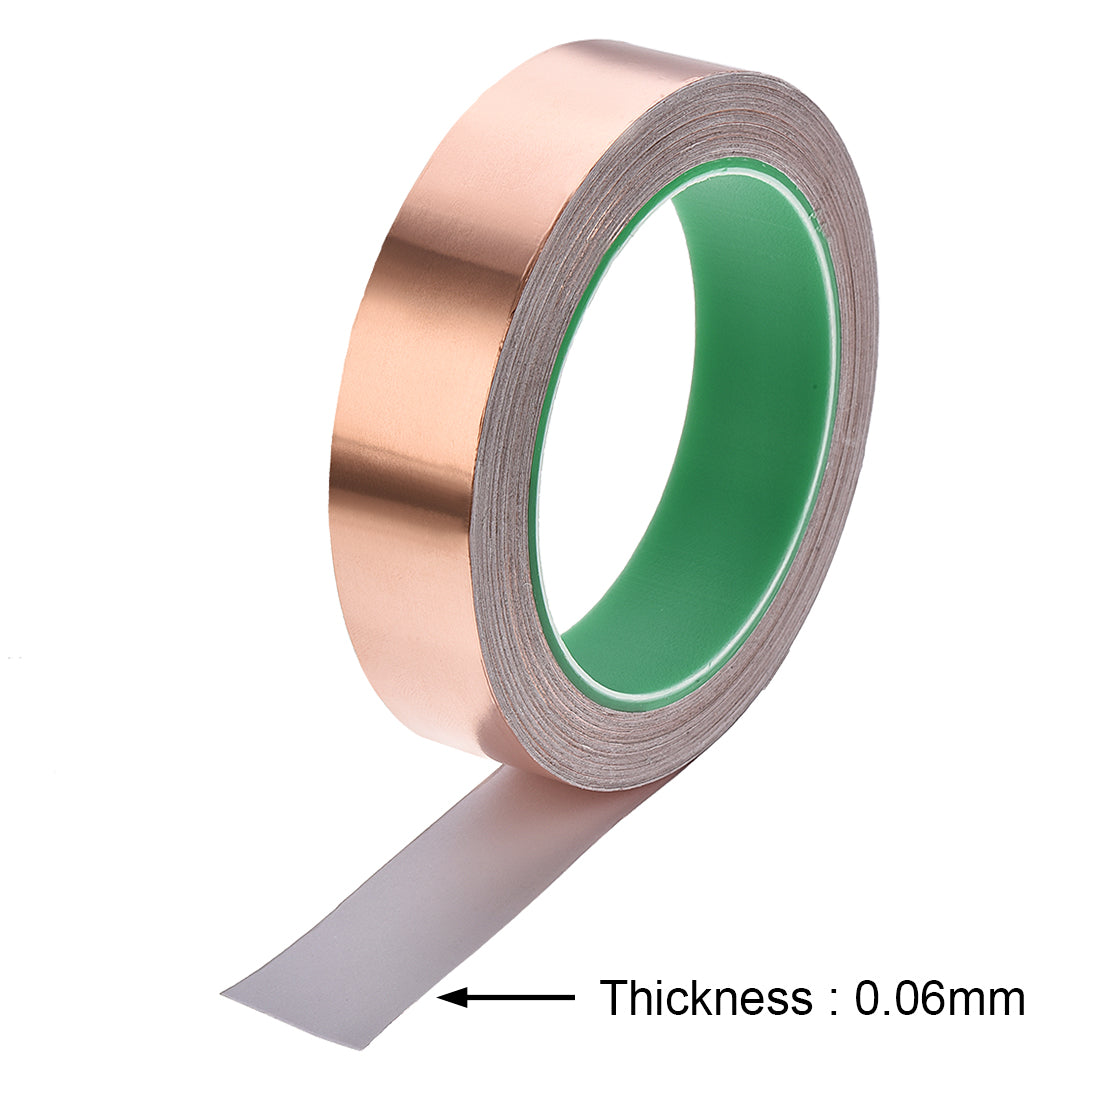 uxcell Uxcell Double Sided Conductive Tape Copper Foil Tape 25mm x 20m for EMI Shielding